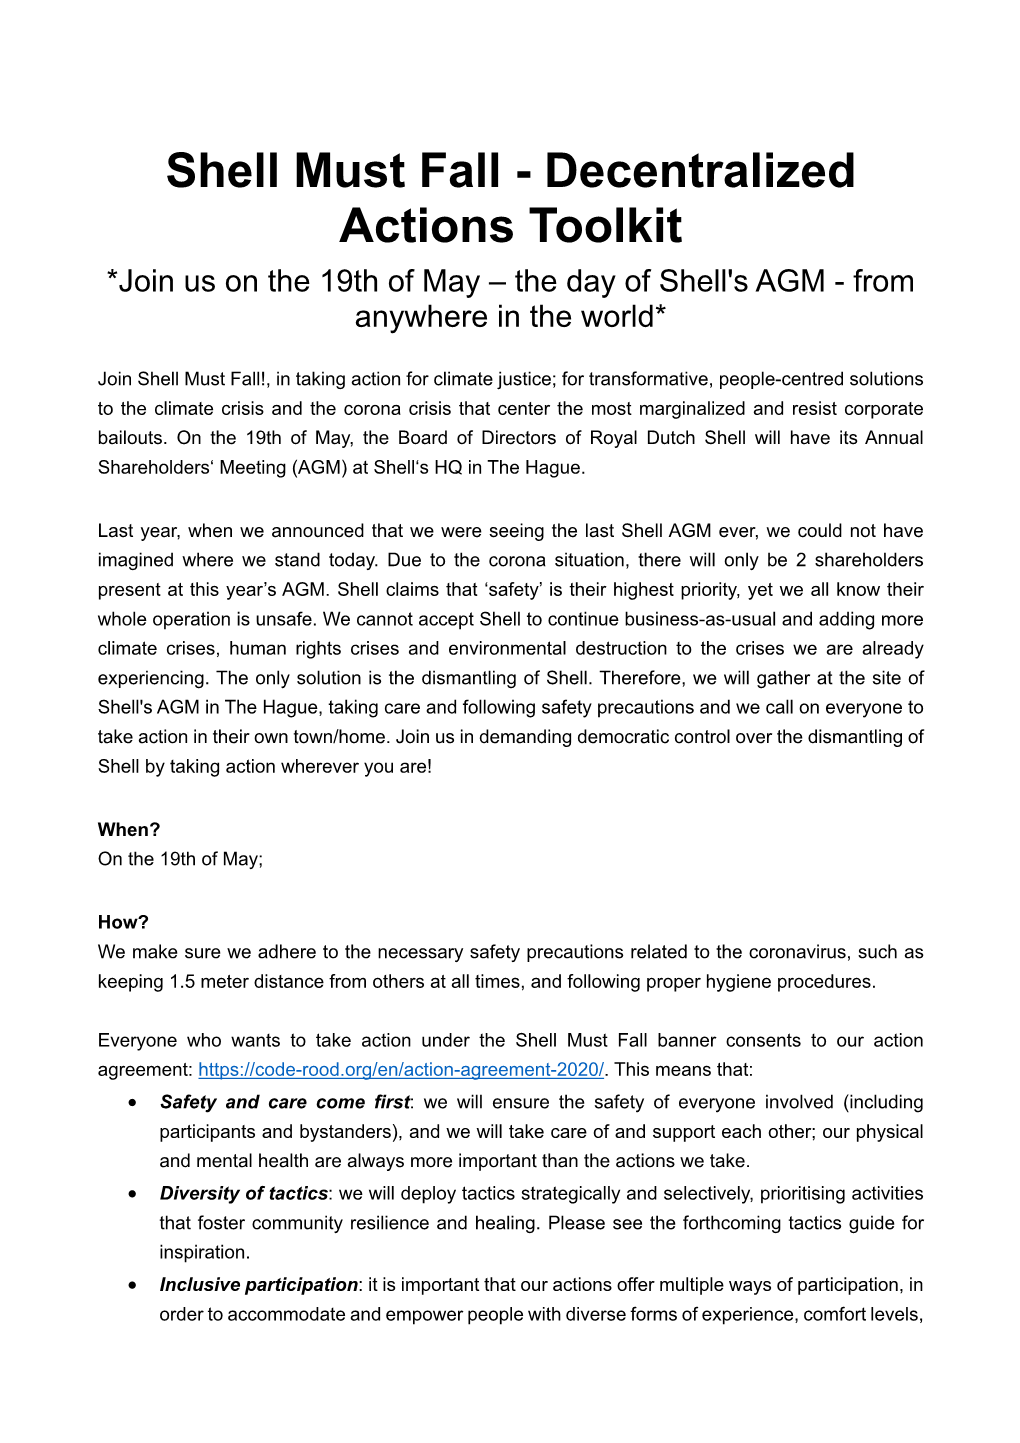 Shell Must Fall - Decentralized Actions Toolkit *Join Us on the 19Th of May – the Day of Shell's AGM - from Anywhere in the World*